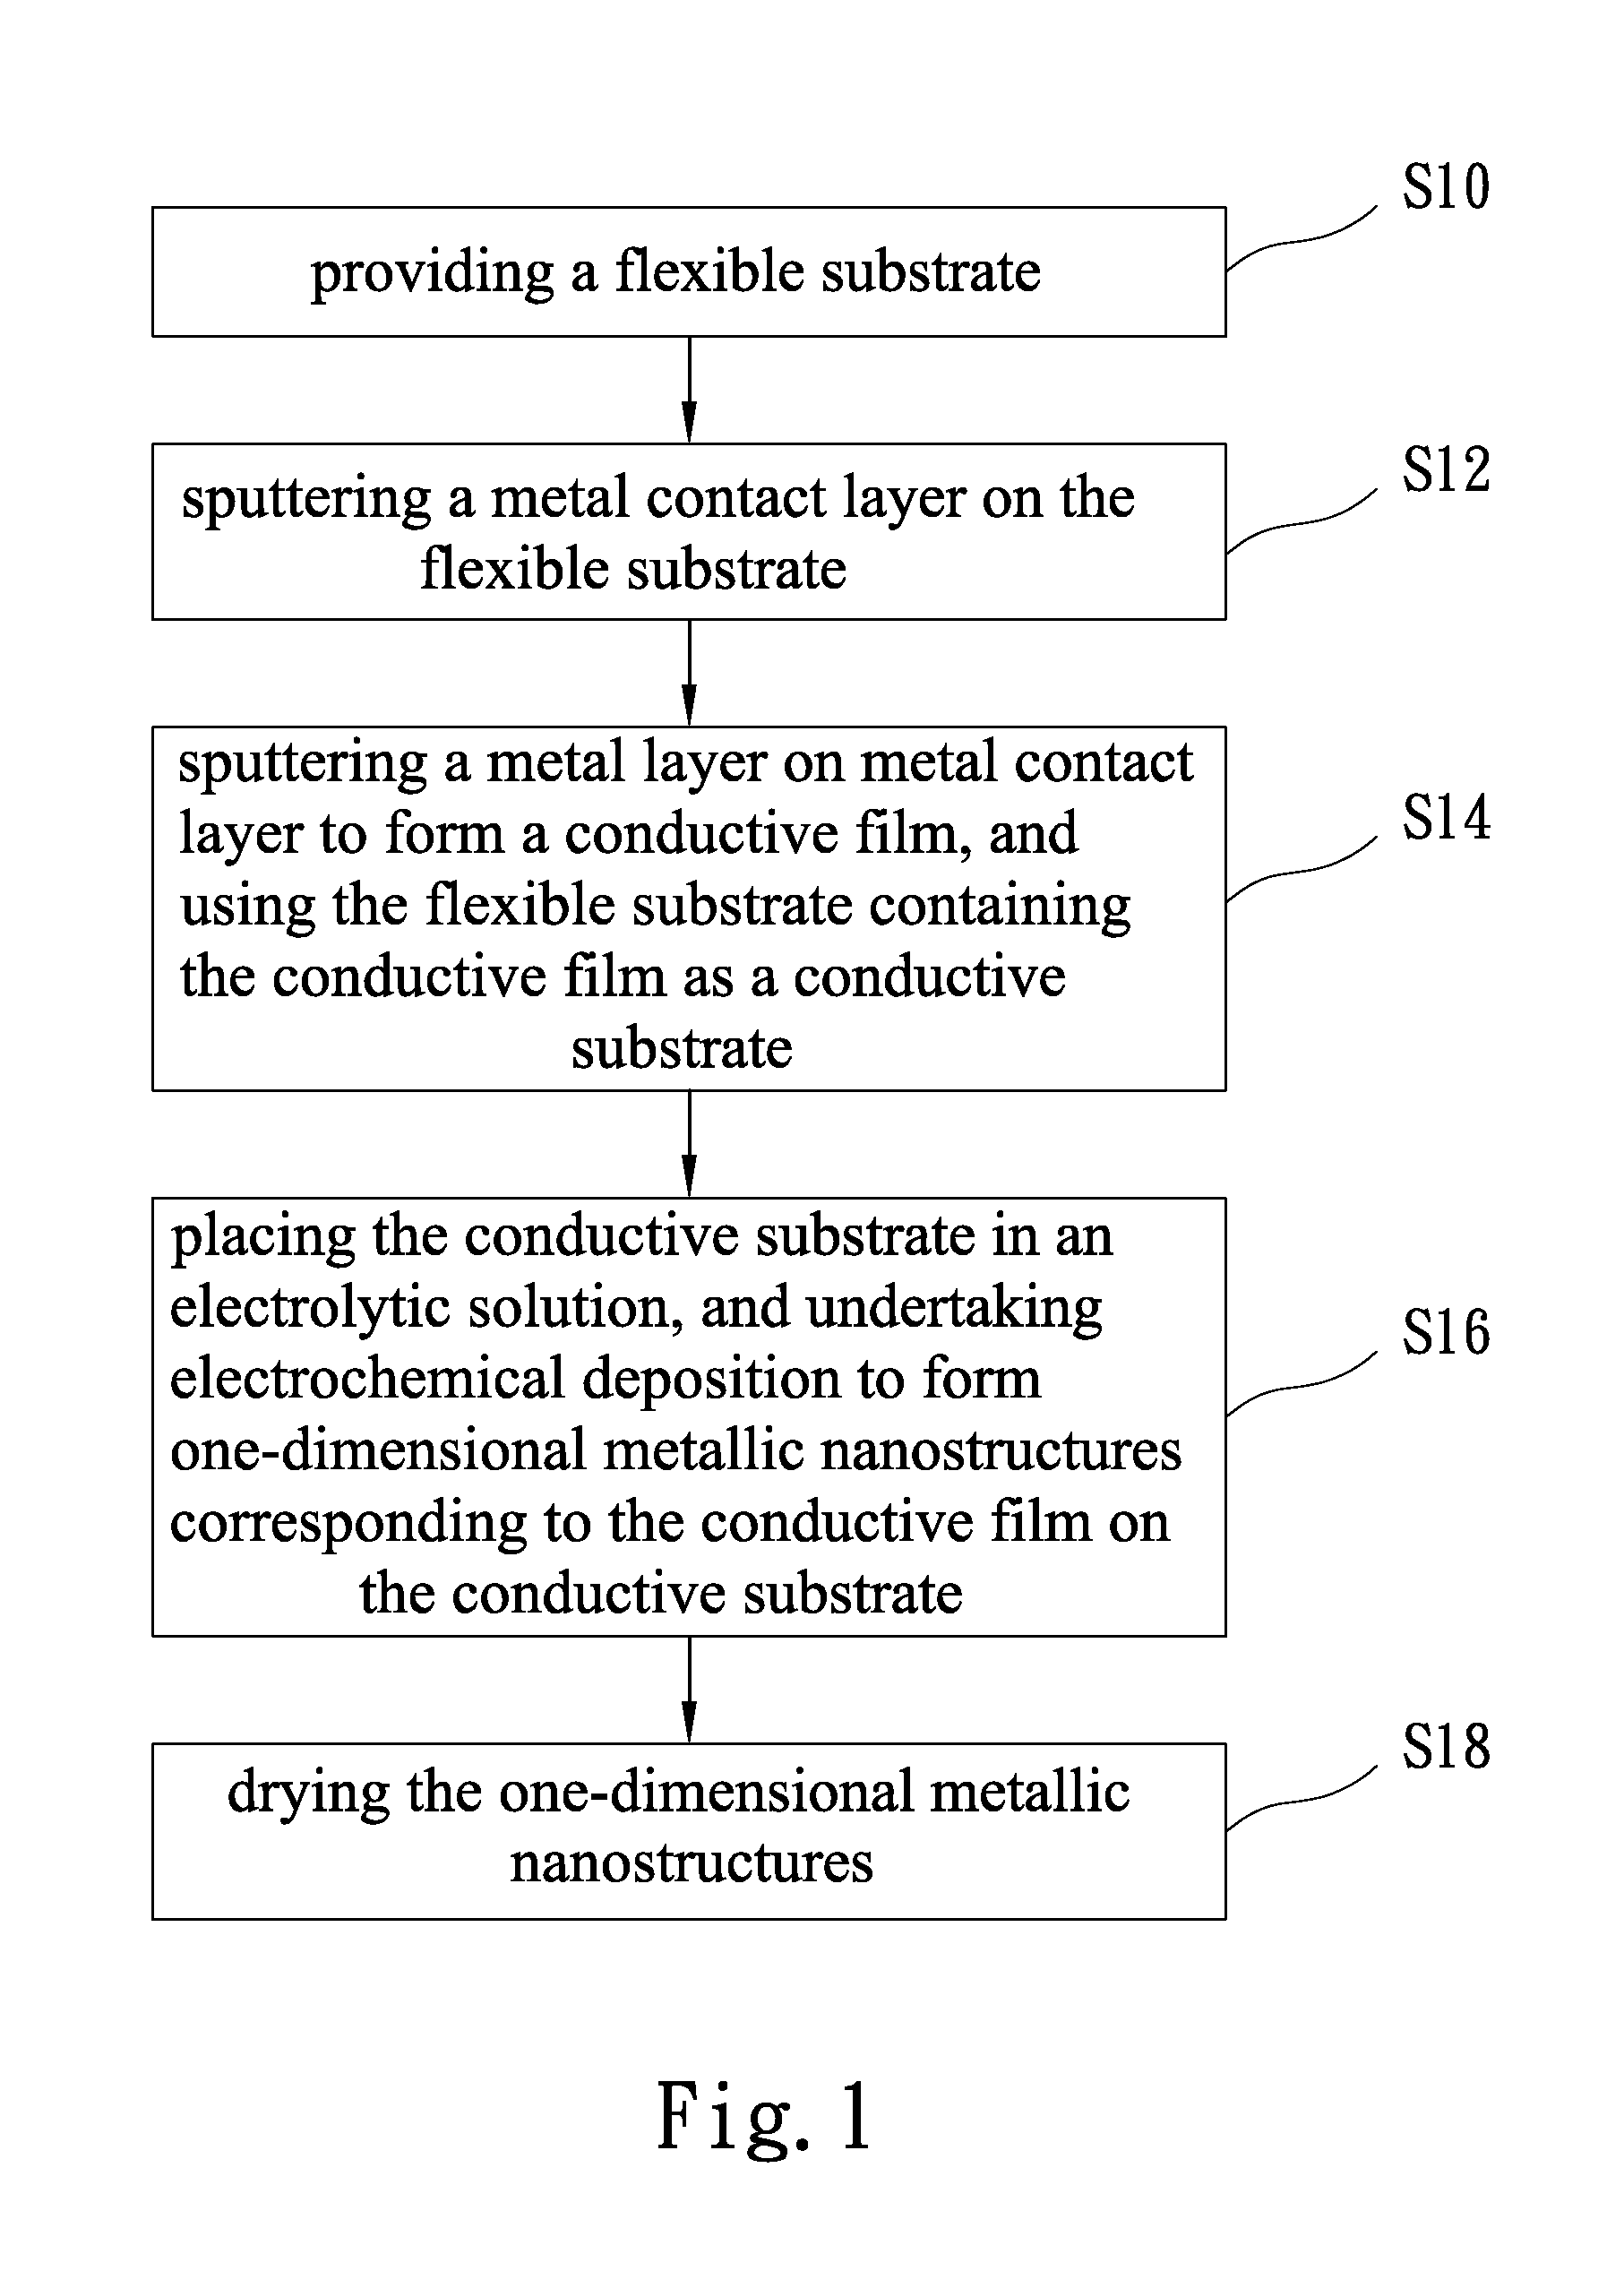 Method for fabricating one-dimensional metallic nanostructures